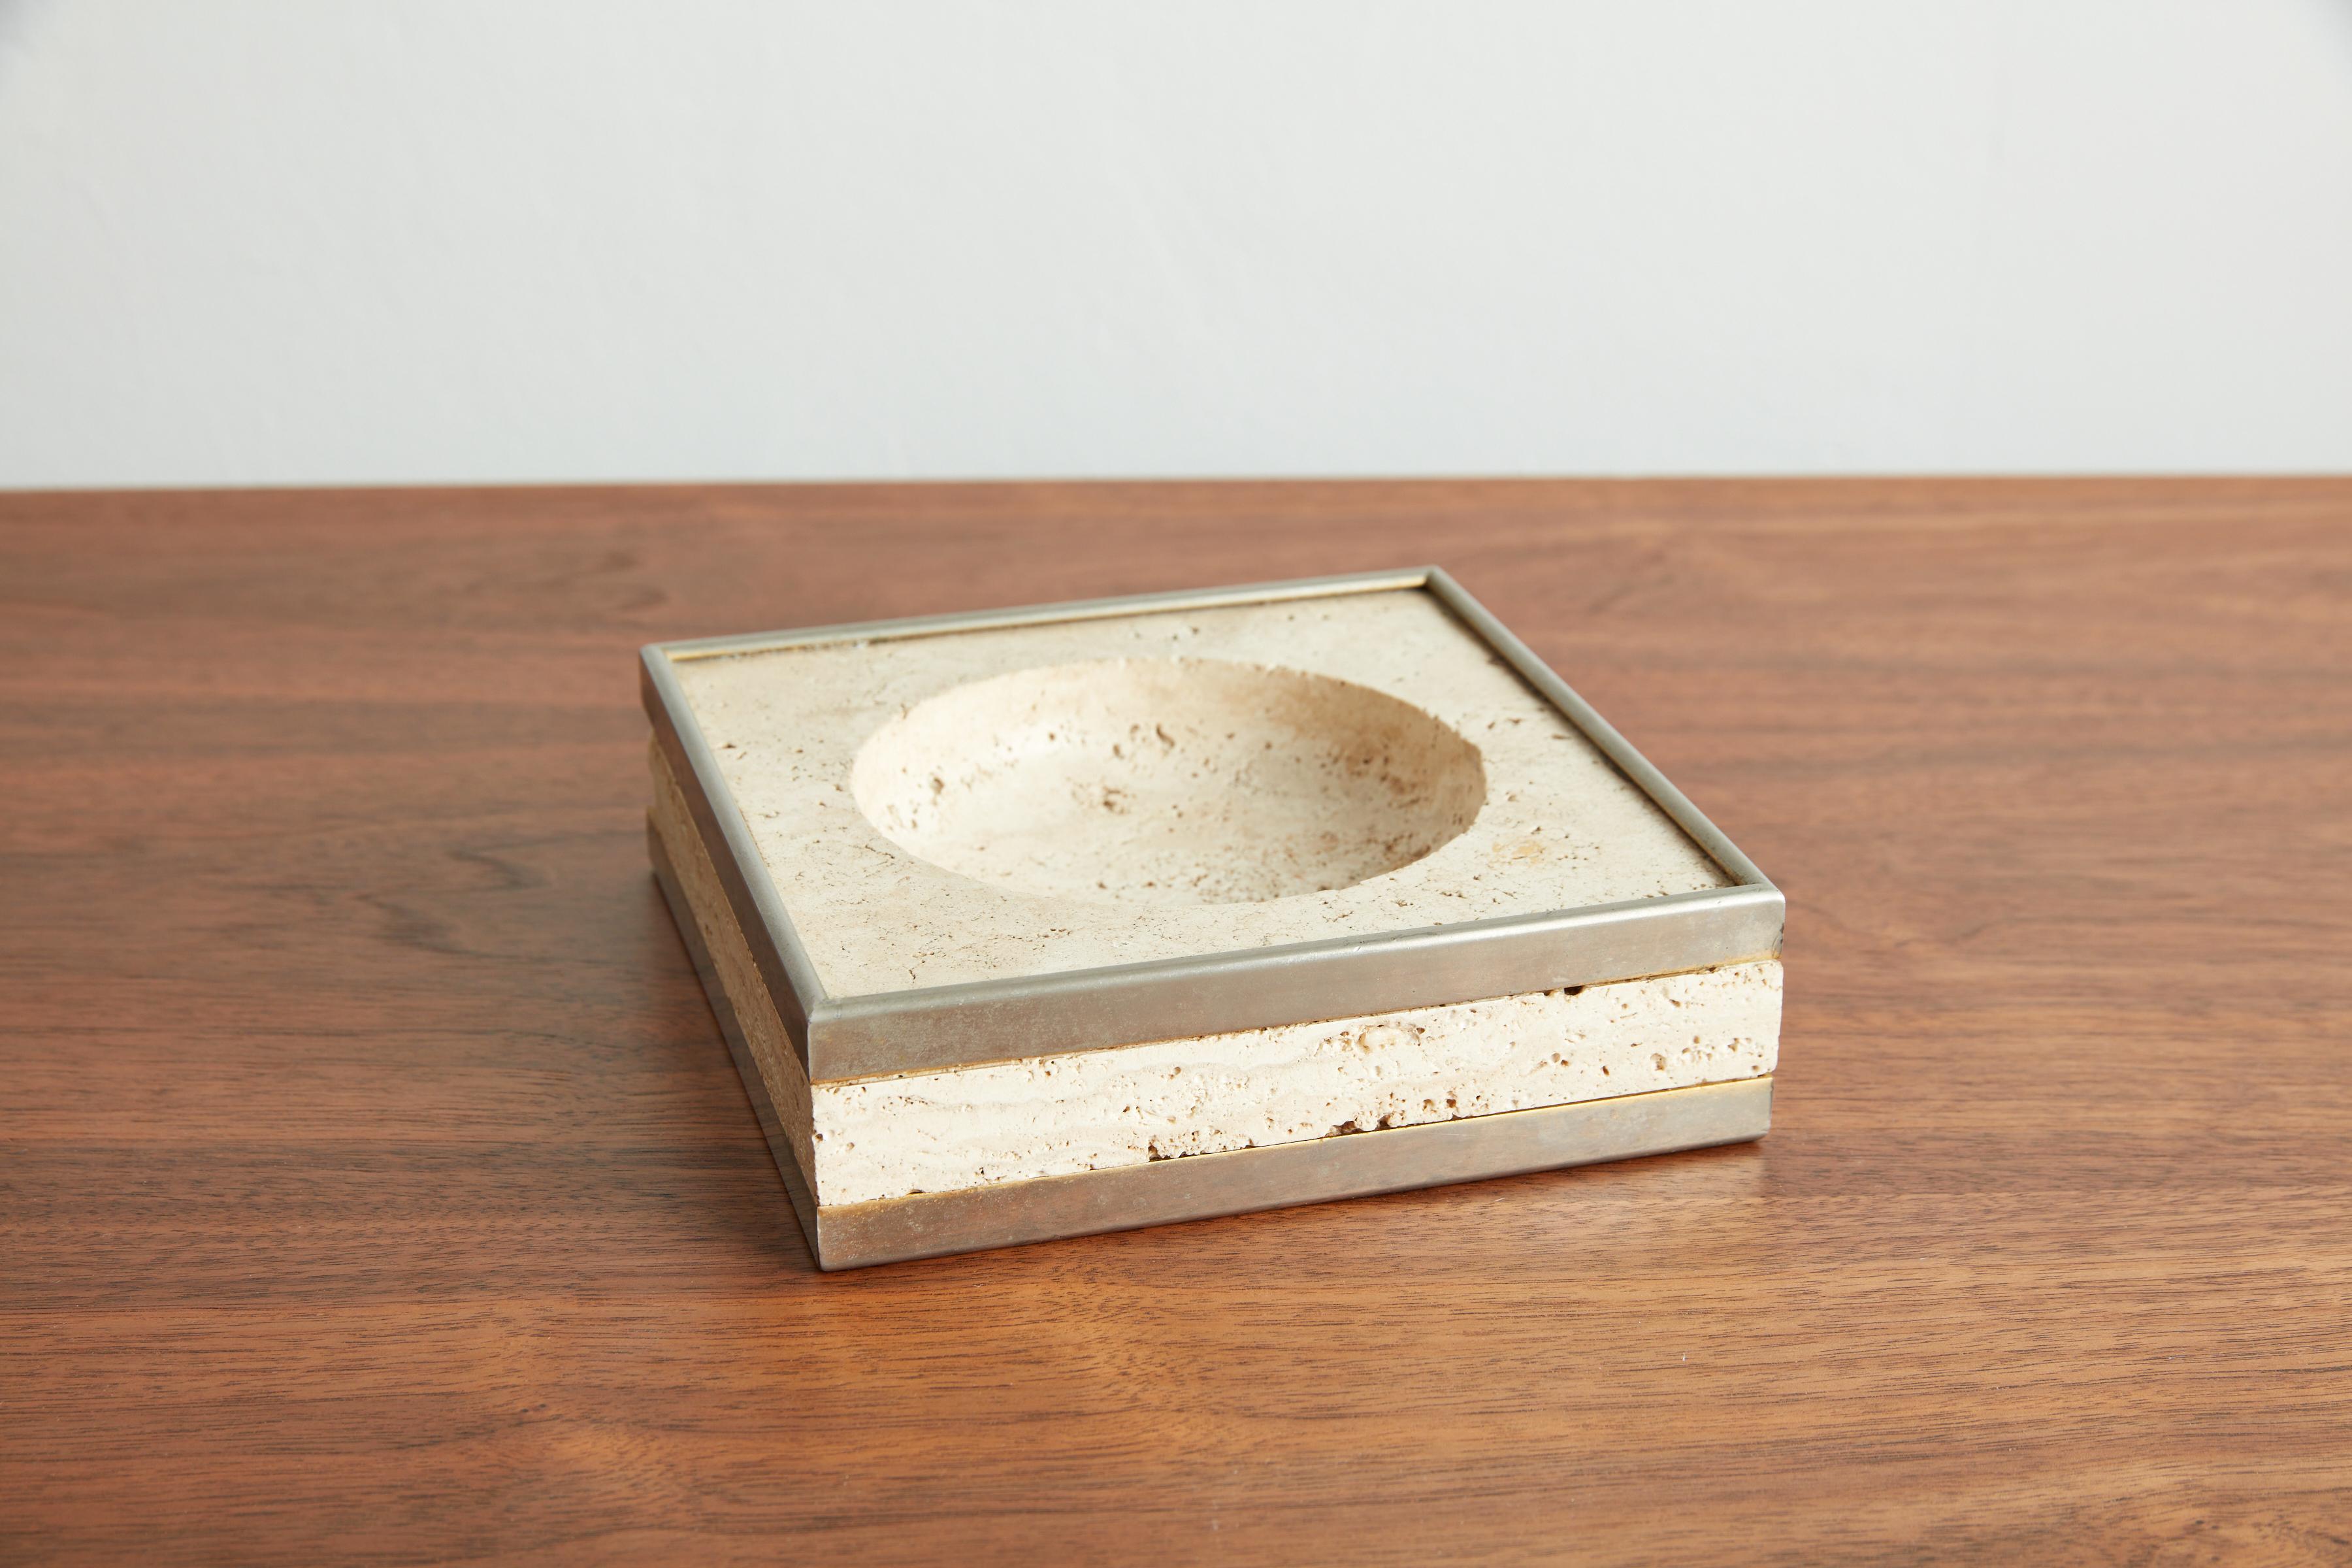 Handsome travertine stone ashtray with chrome edging detail.
Great for any desk to hold paperclips etc!
Italy, 1970s.